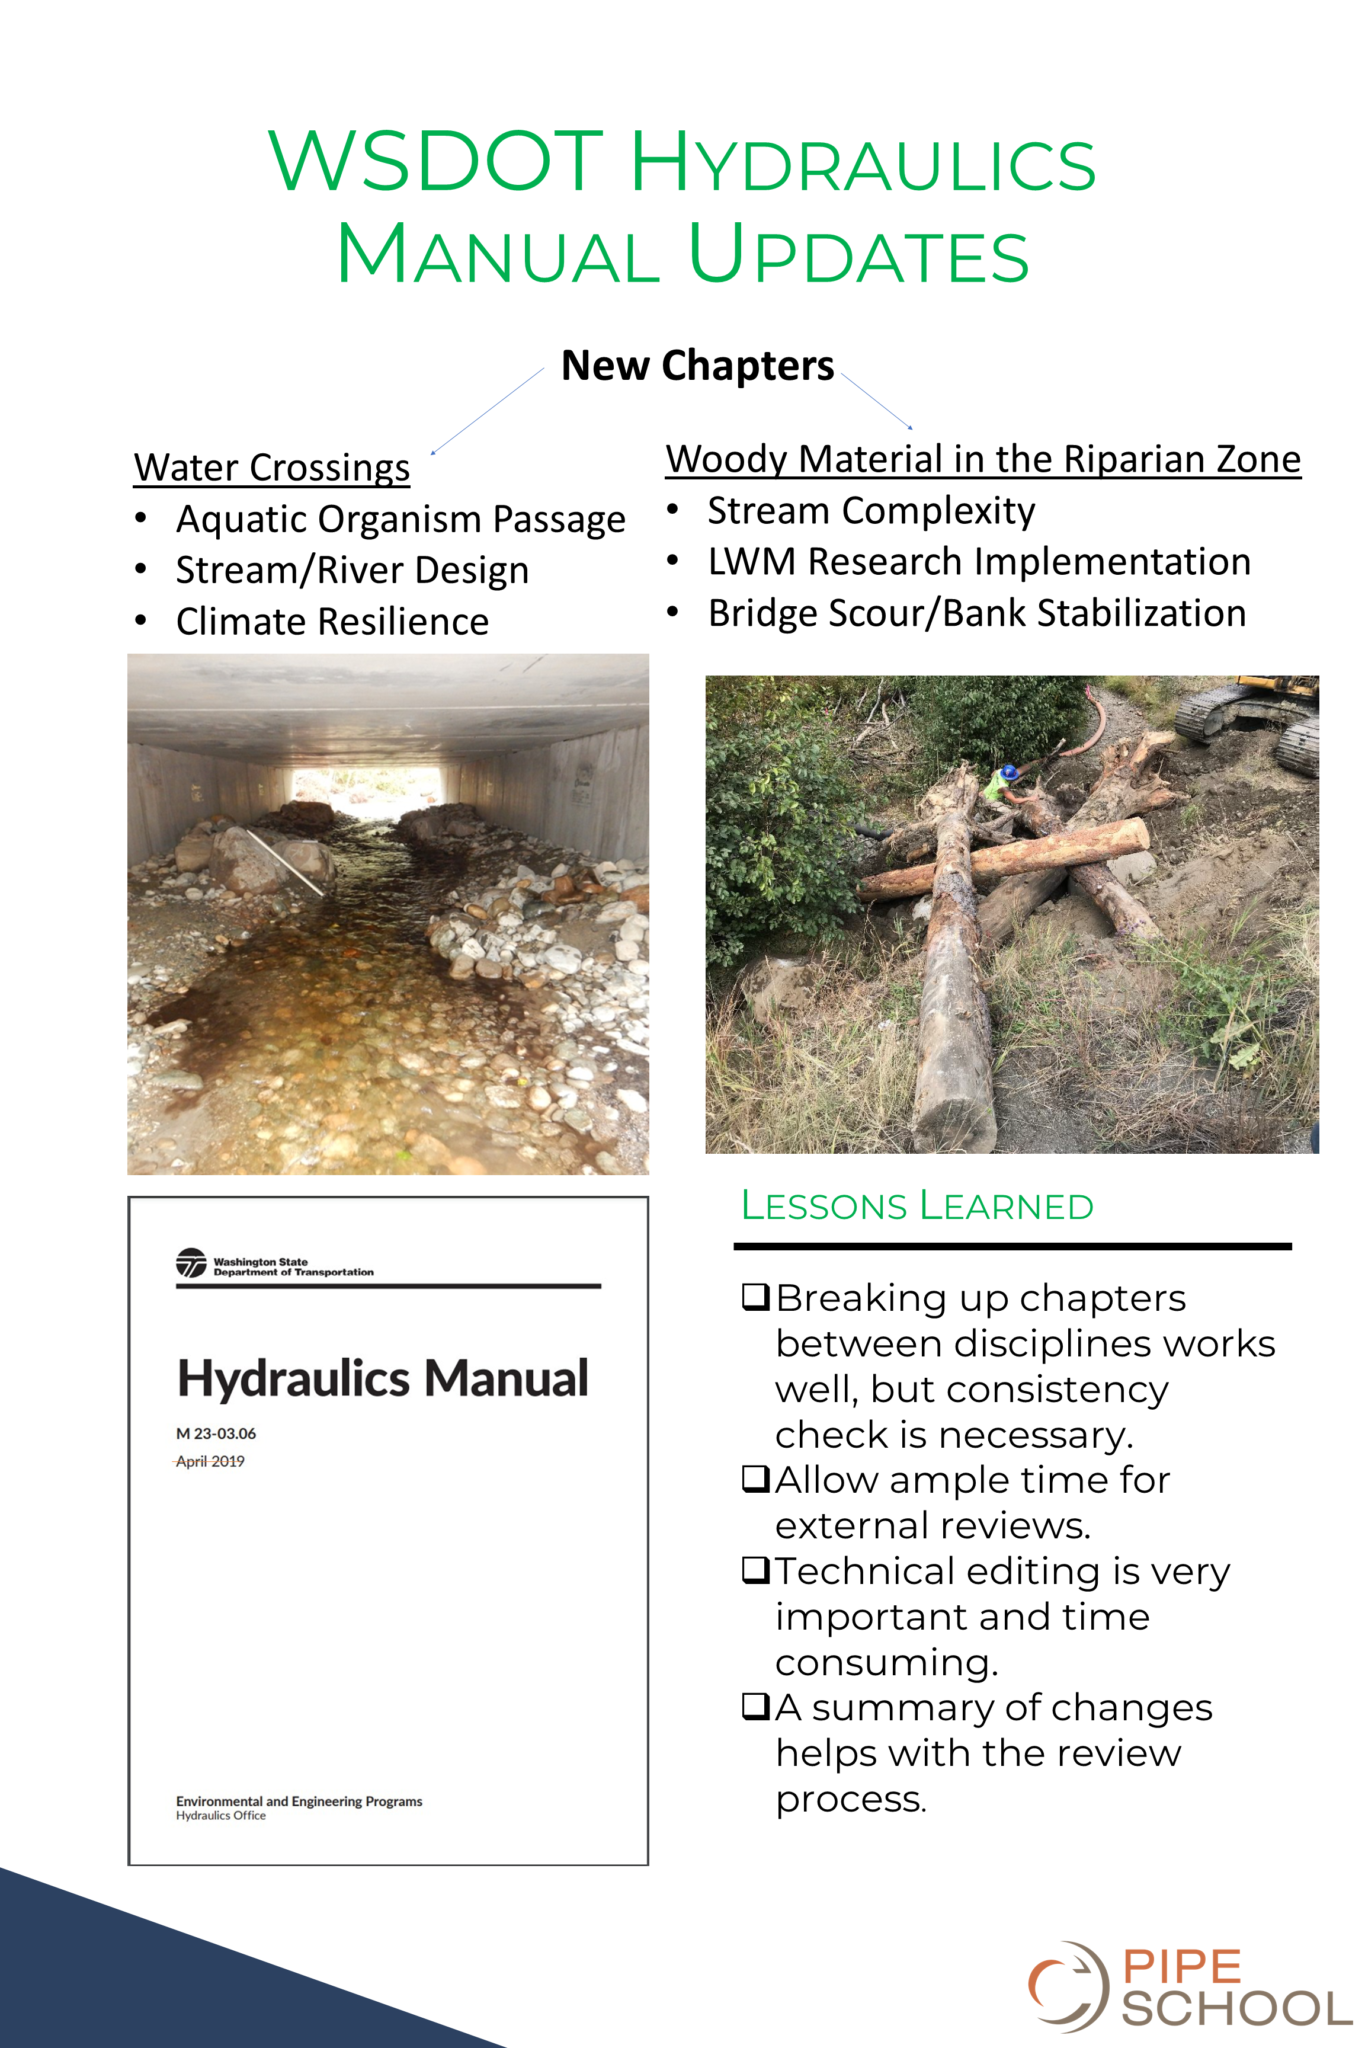 WSDOT Hydraulics Manual Update Poster Session 2022 ACPA Pipe School